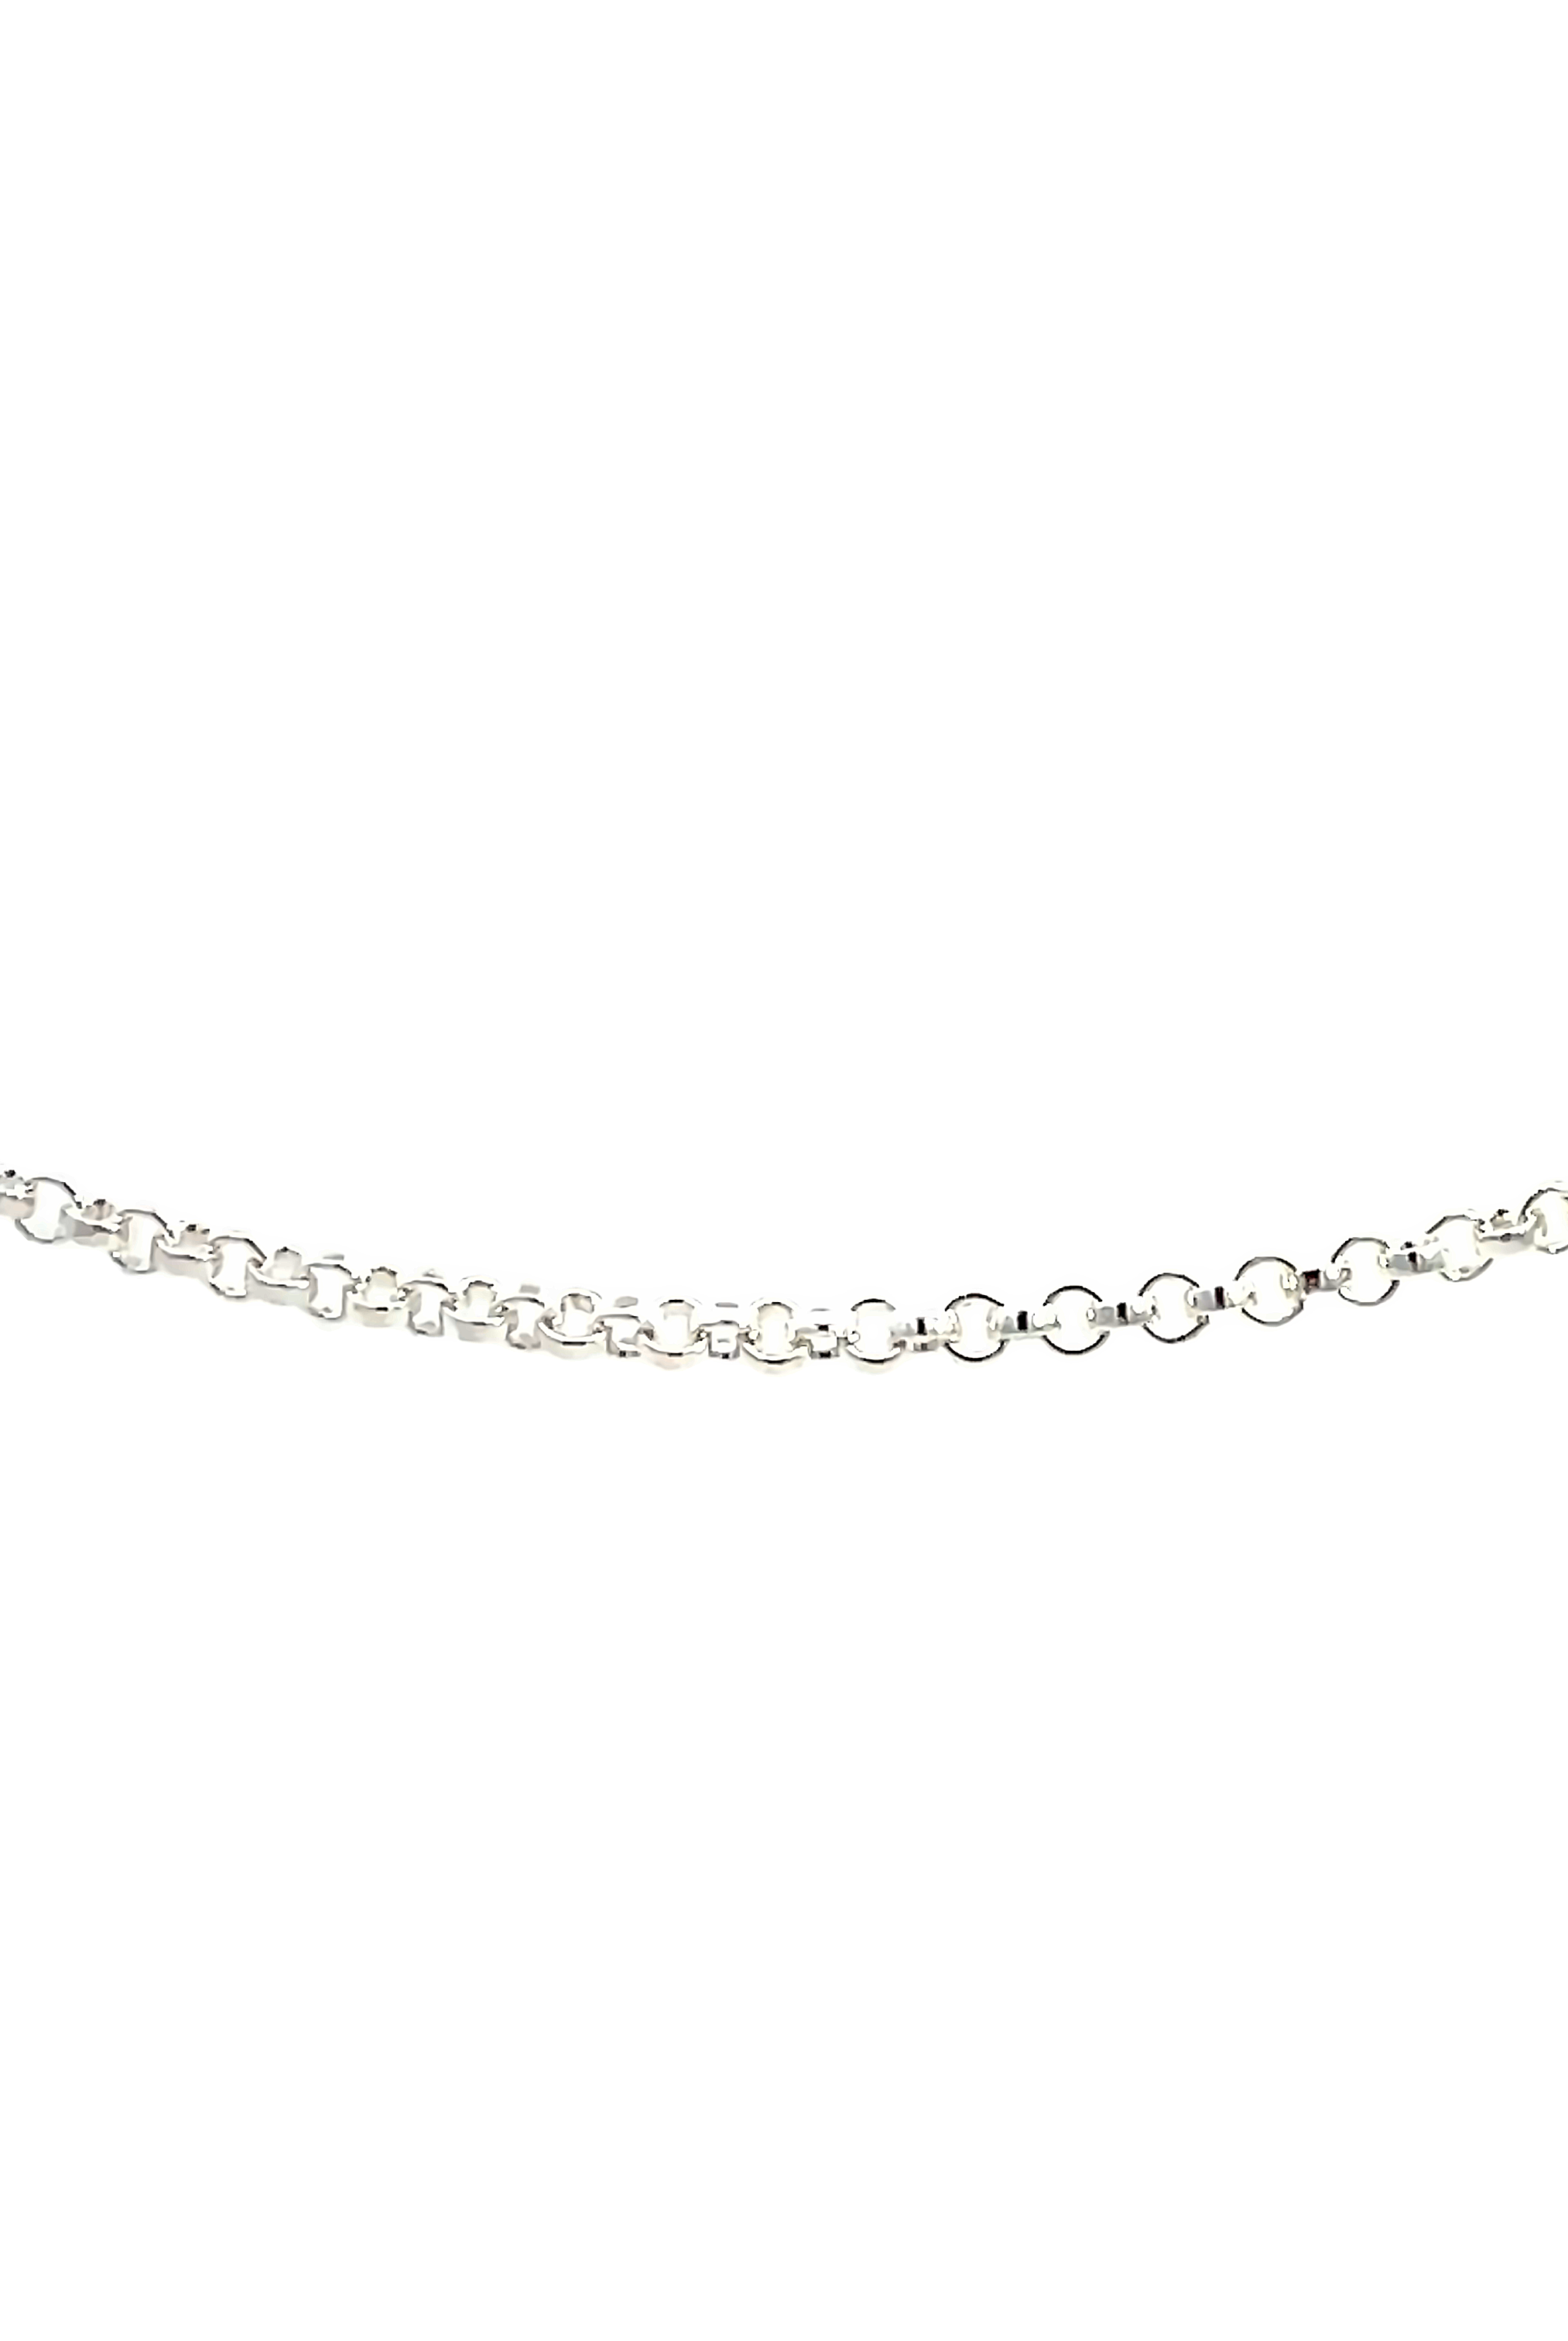 Sterling Silver Rolo Chain for Permanent Jewelry 2